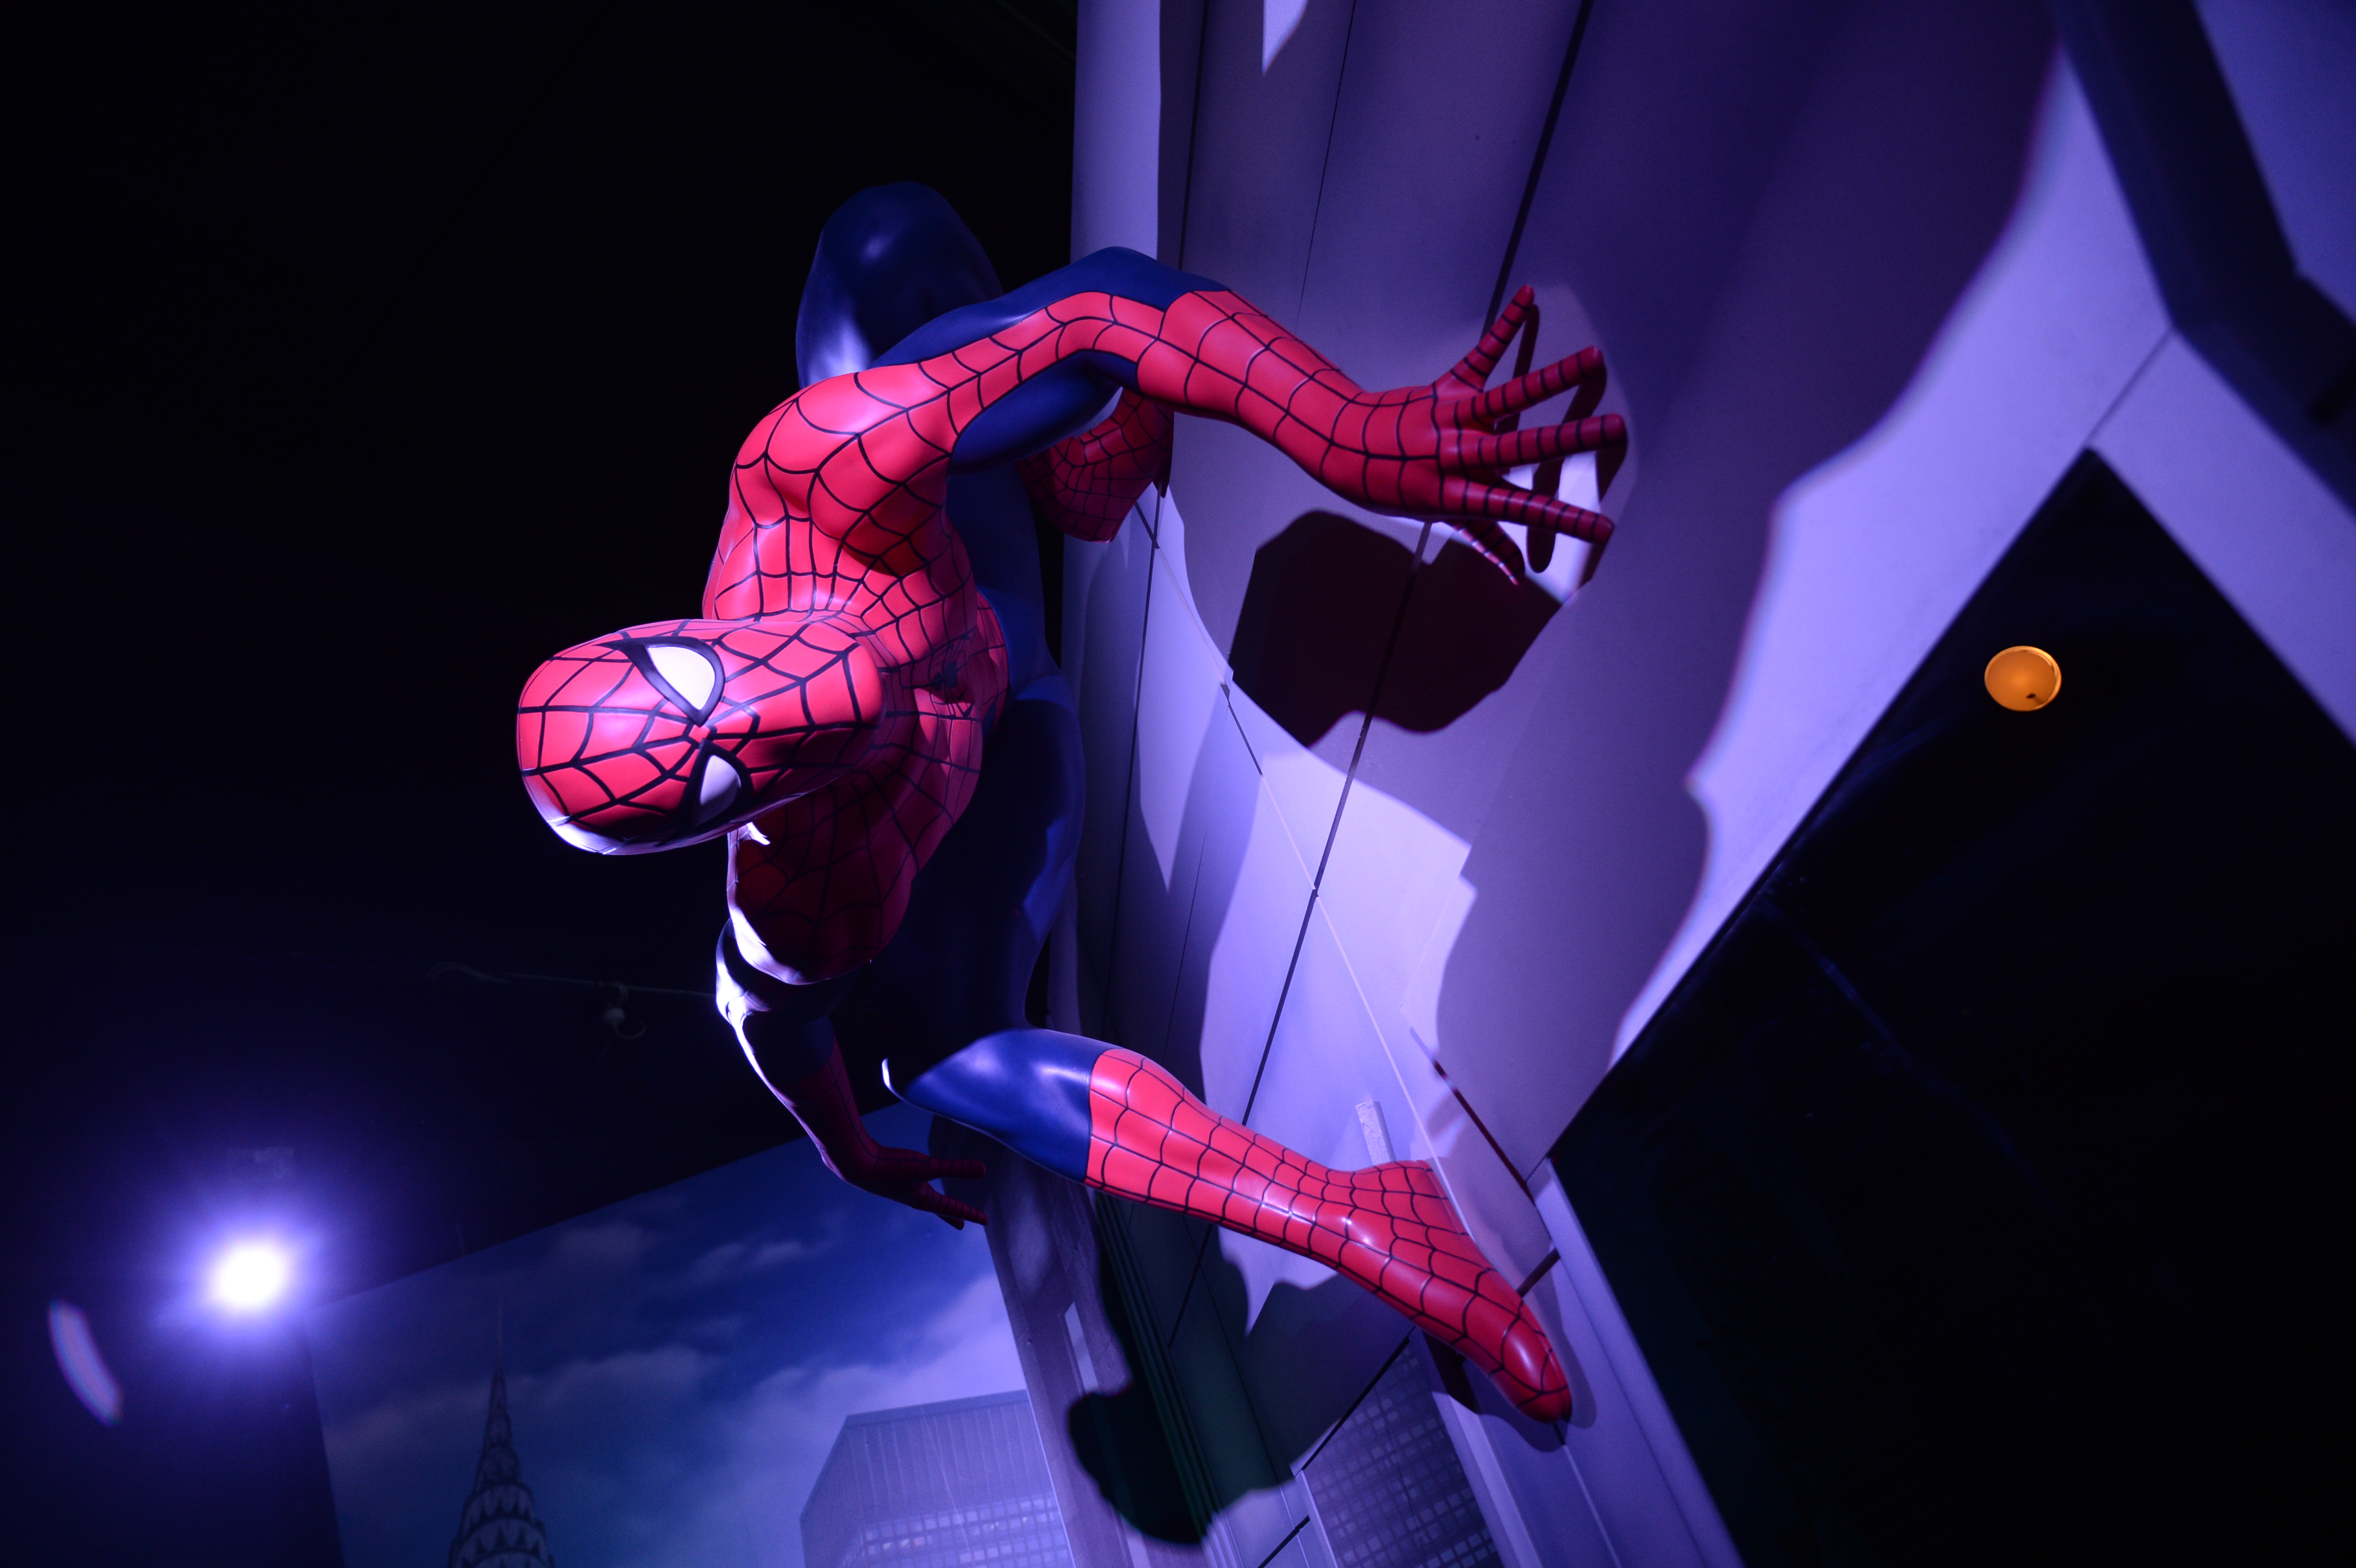 Spiderman on the side of wall at Madame Tussauds Blackpool